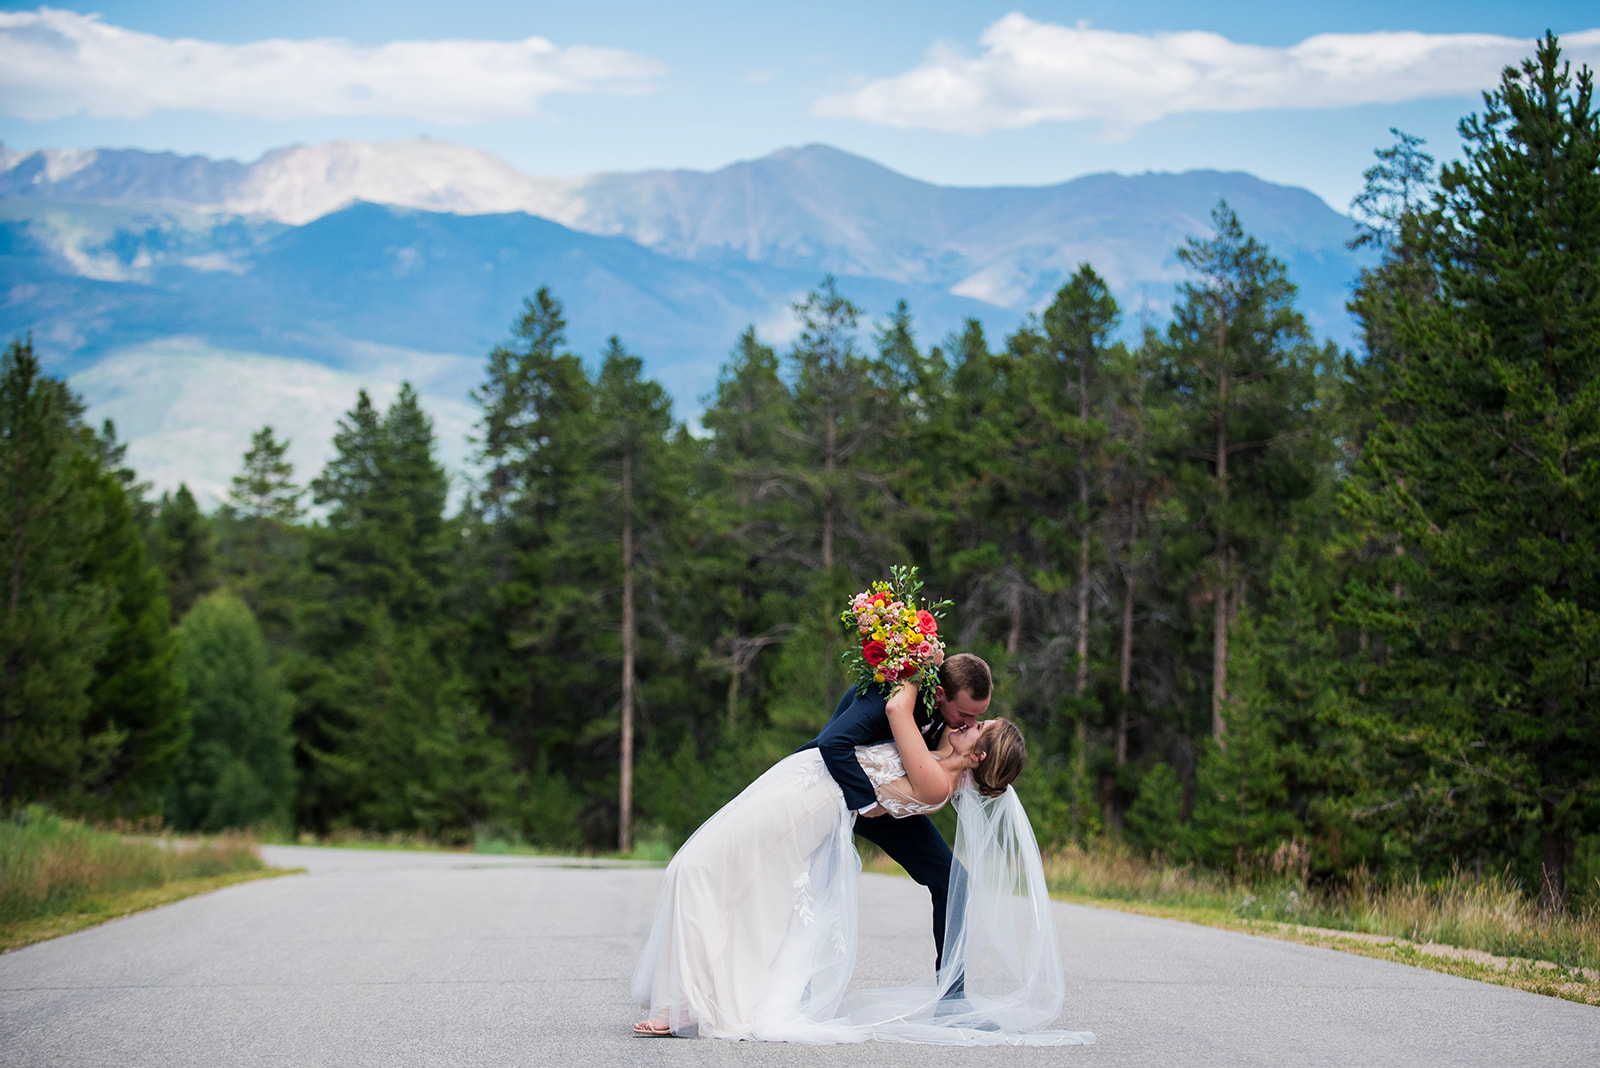 The groom dips the bride for a kiss with the Colorado Rocky Mountains in the background.